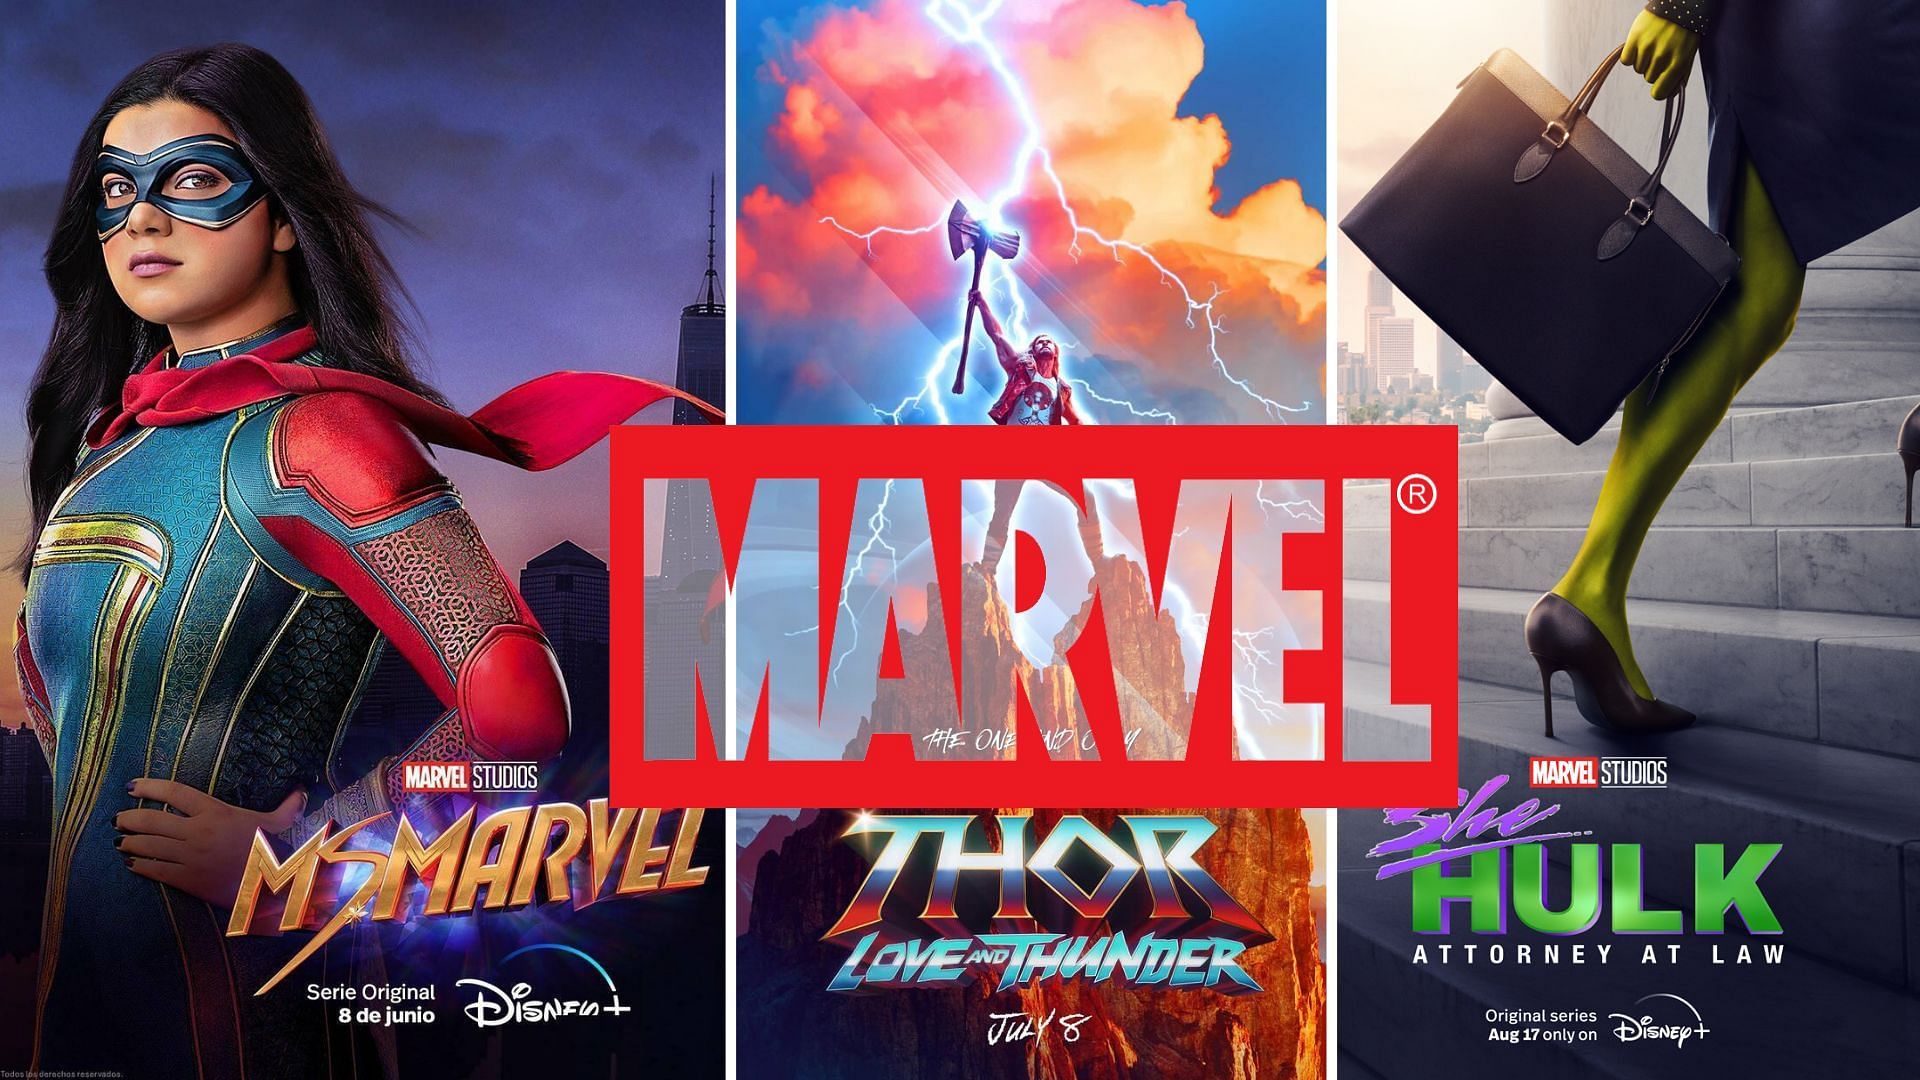 Marvel releases to look forward to in 2022 (Images via Marvel Studios)